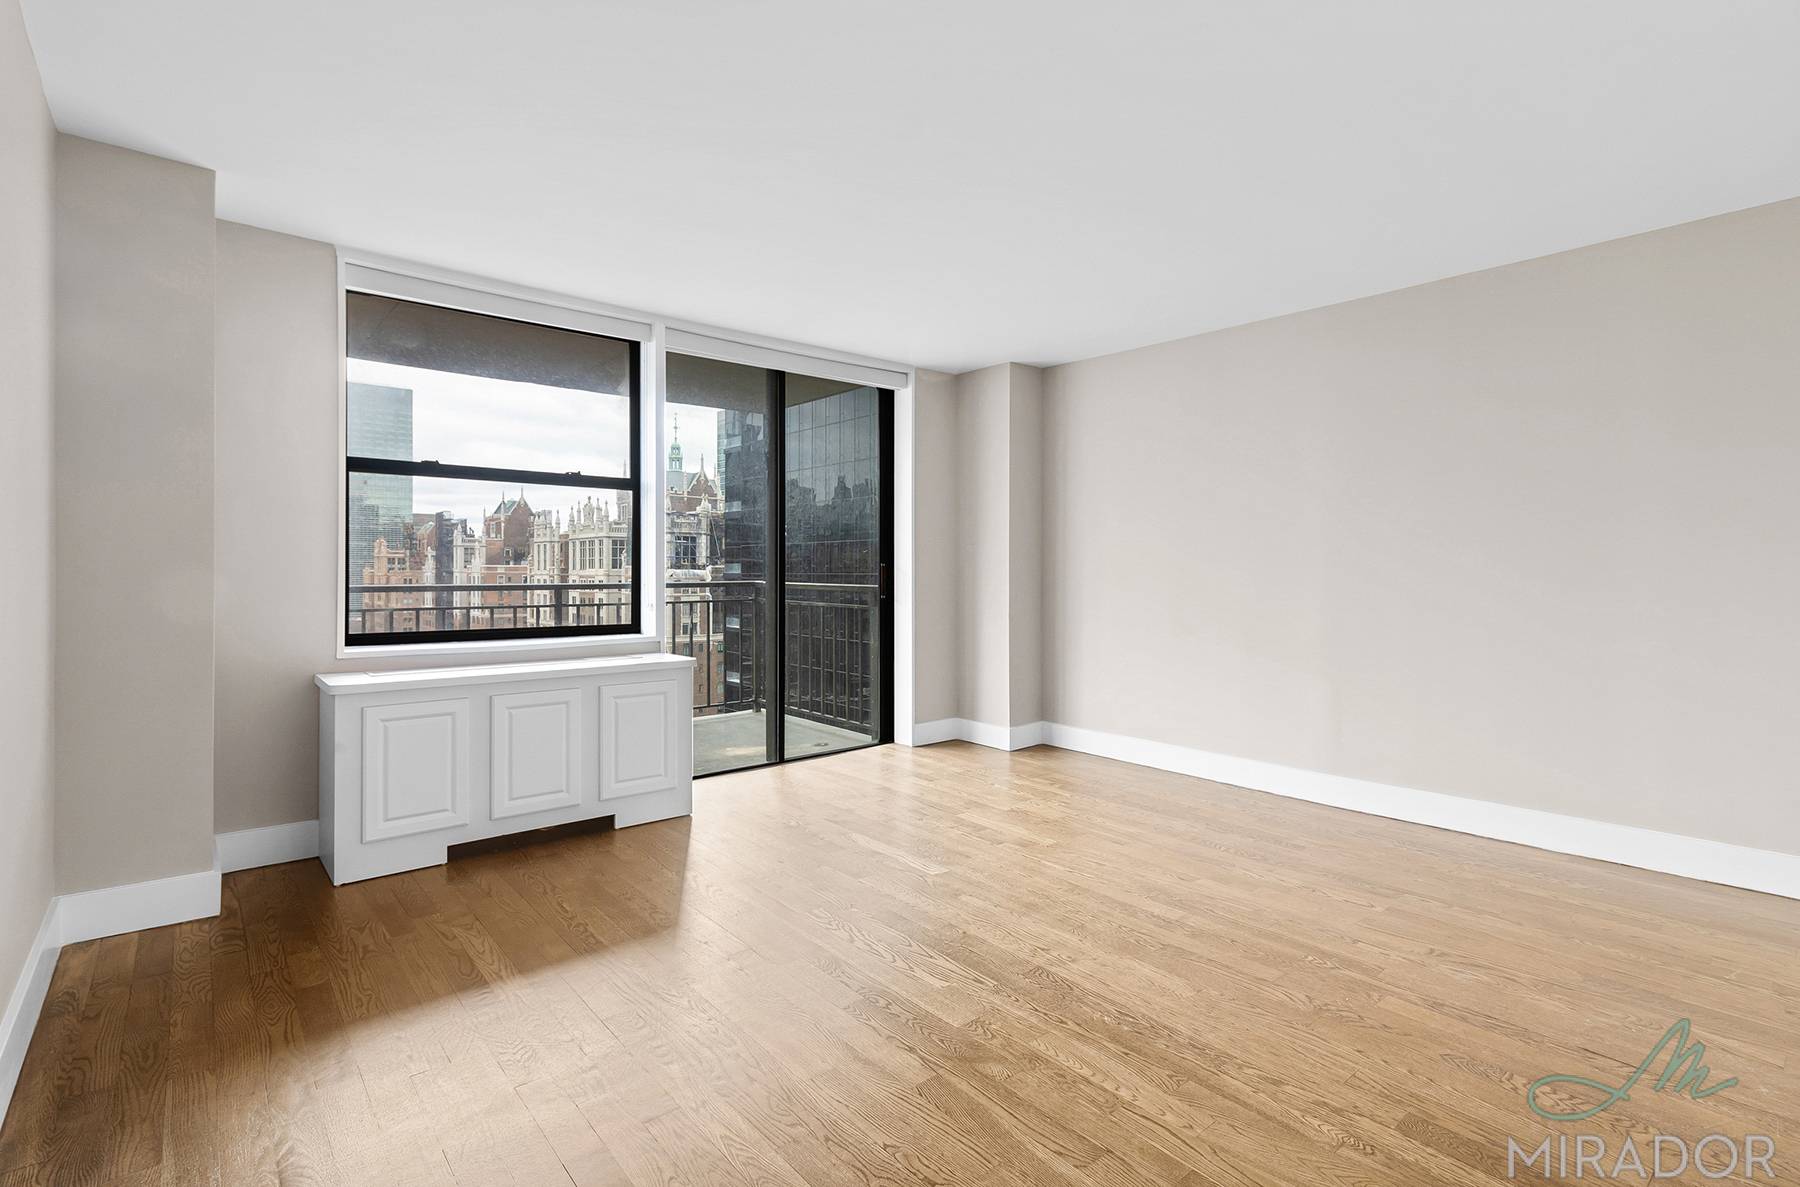 Enjoy living in this newly gut renovated north facing one bedroom with a balcony featuring water views on the 29th floor of New York Tower.